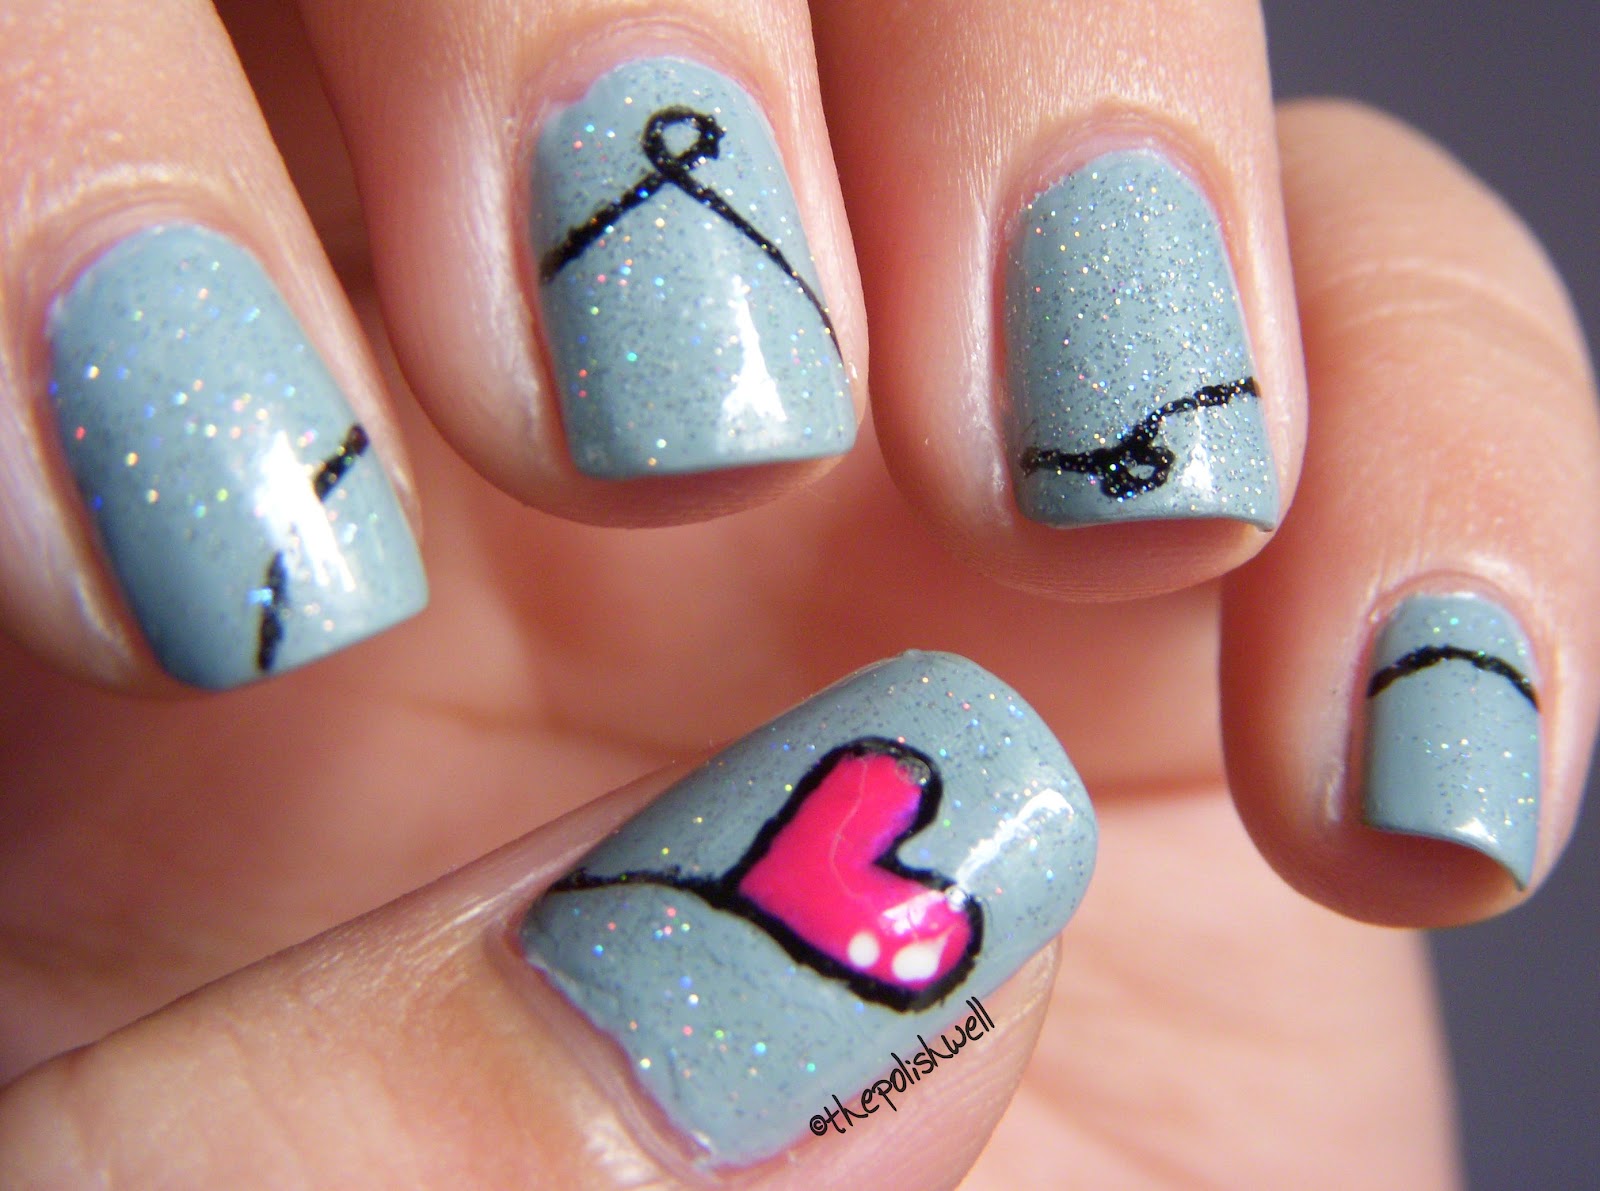 7. "Conversation Heart Nail Designs for Short Nails" - wide 4